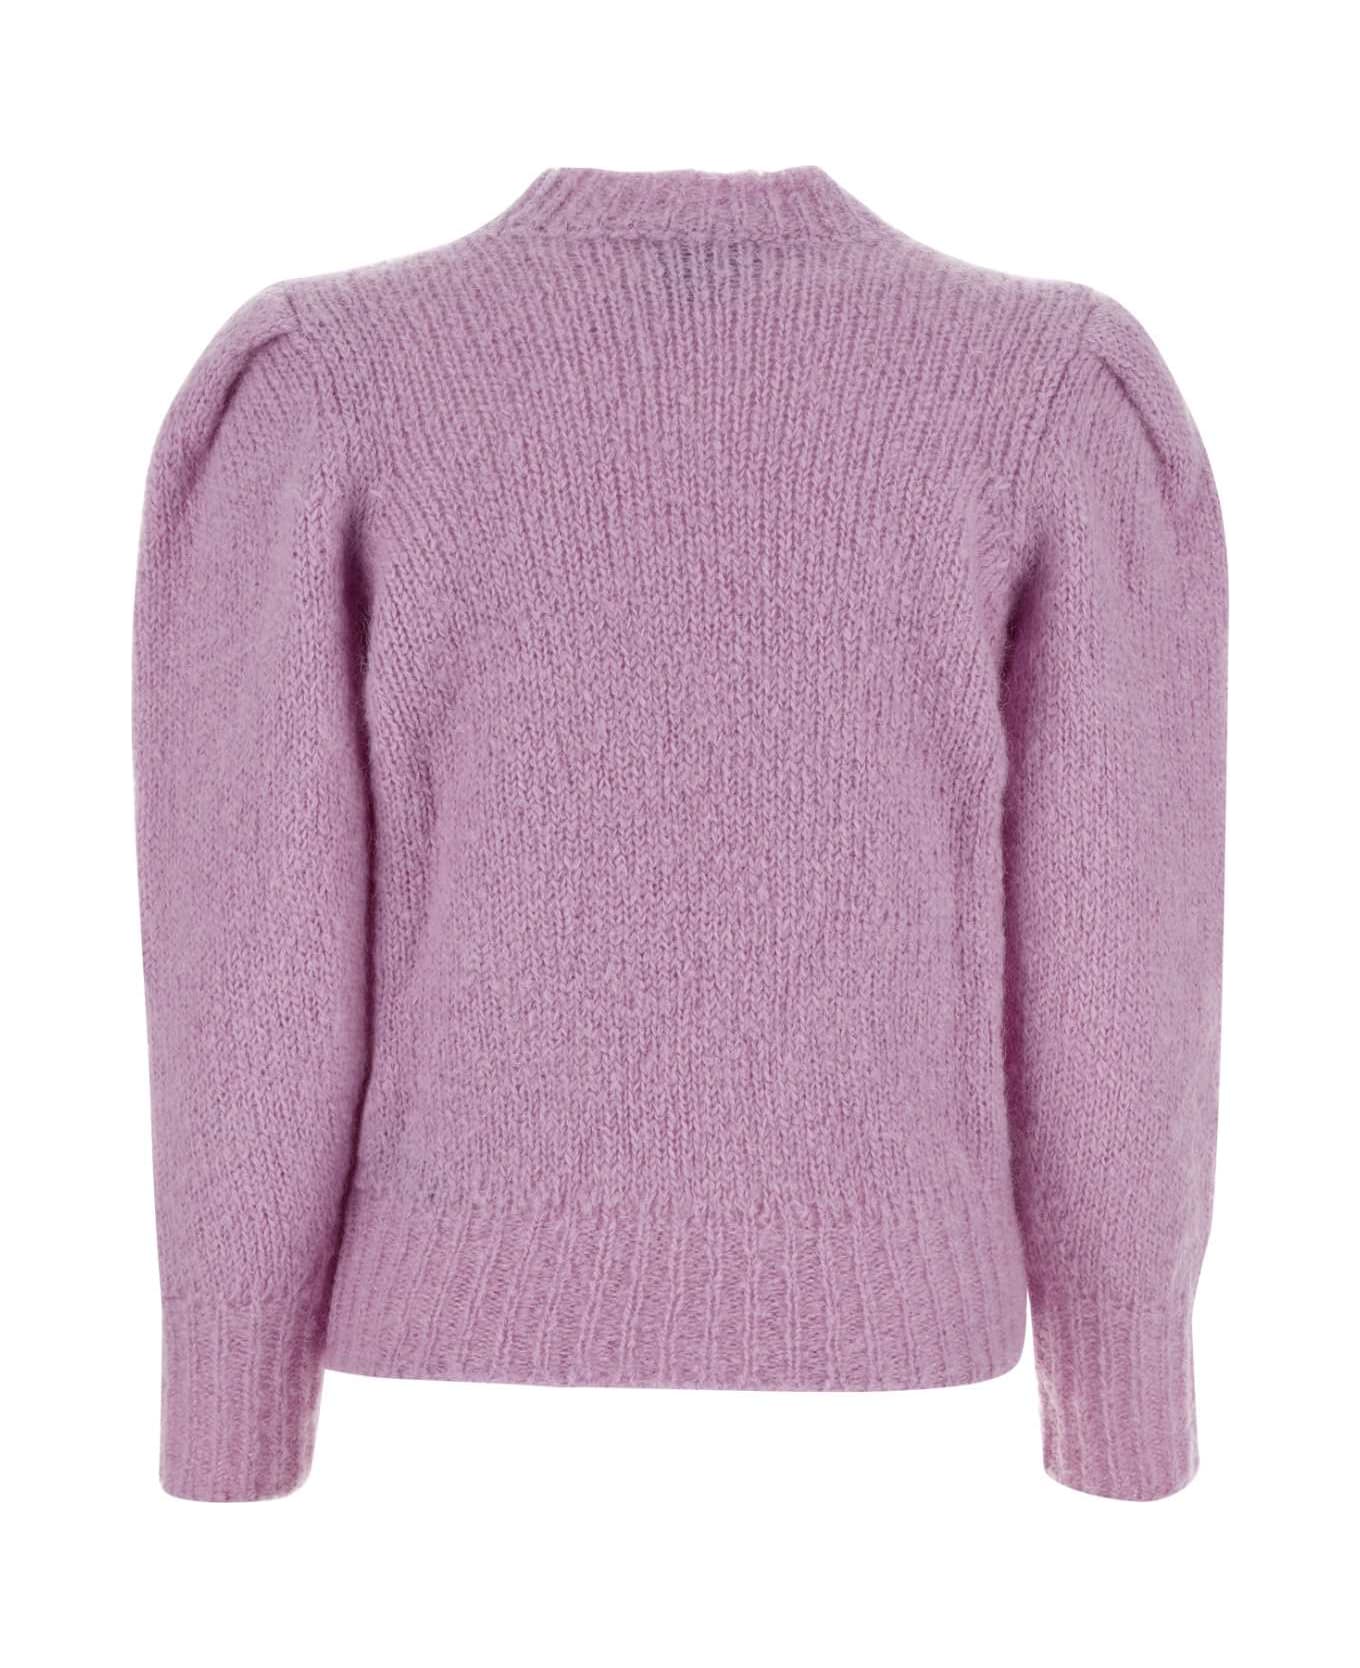 Isabel Marant Lilac Mohair Blend Emma Sweater - LILAC